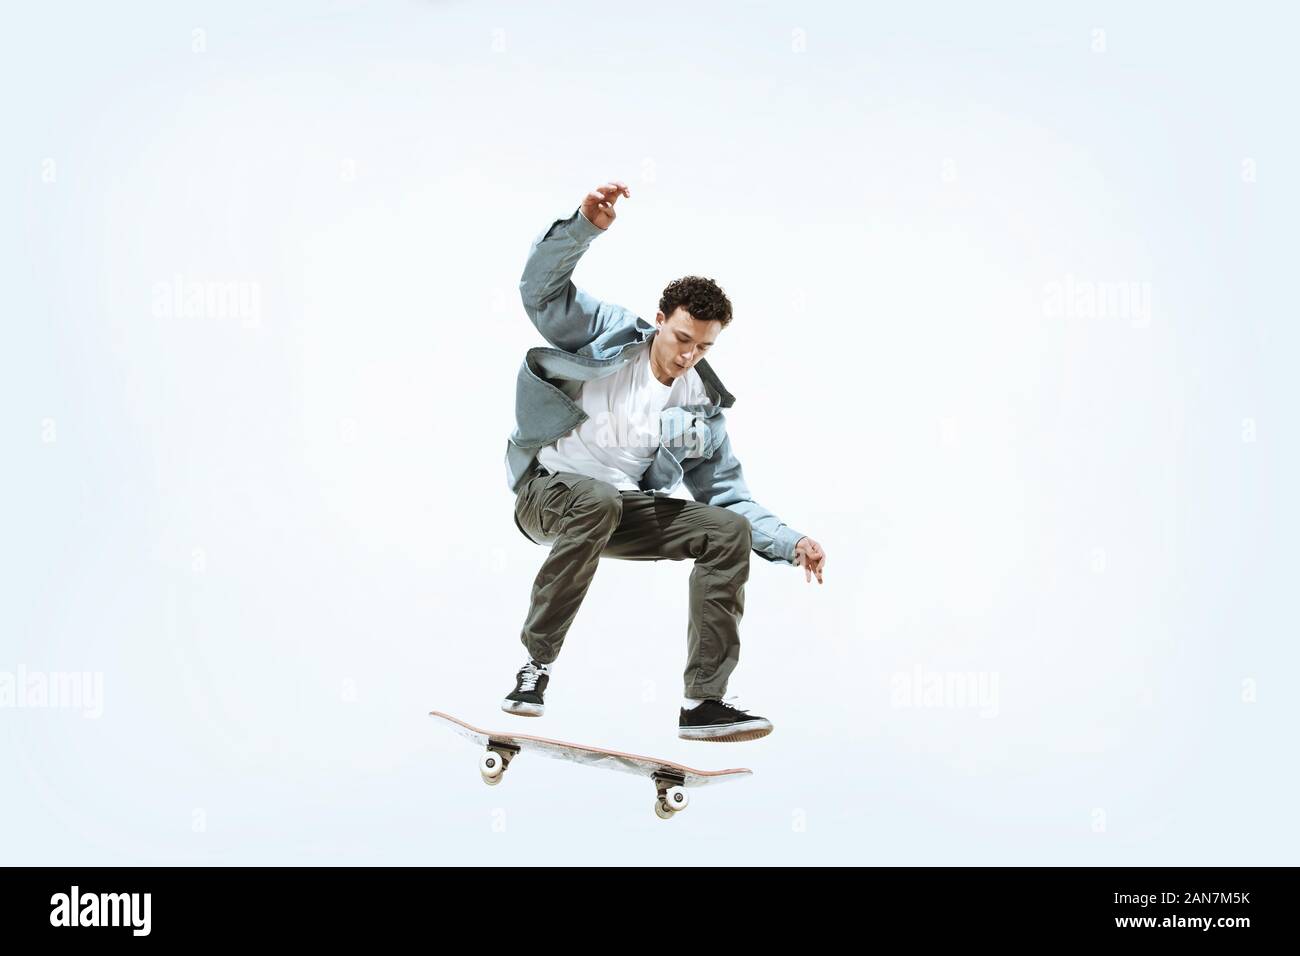 Caucasian young skateboarder riding isolated on a white studio background. Man in casual clothing training, jumping, practicing in motion. Concept of hobby, healthy lifestyle, youth, action, movement. Stock Photo